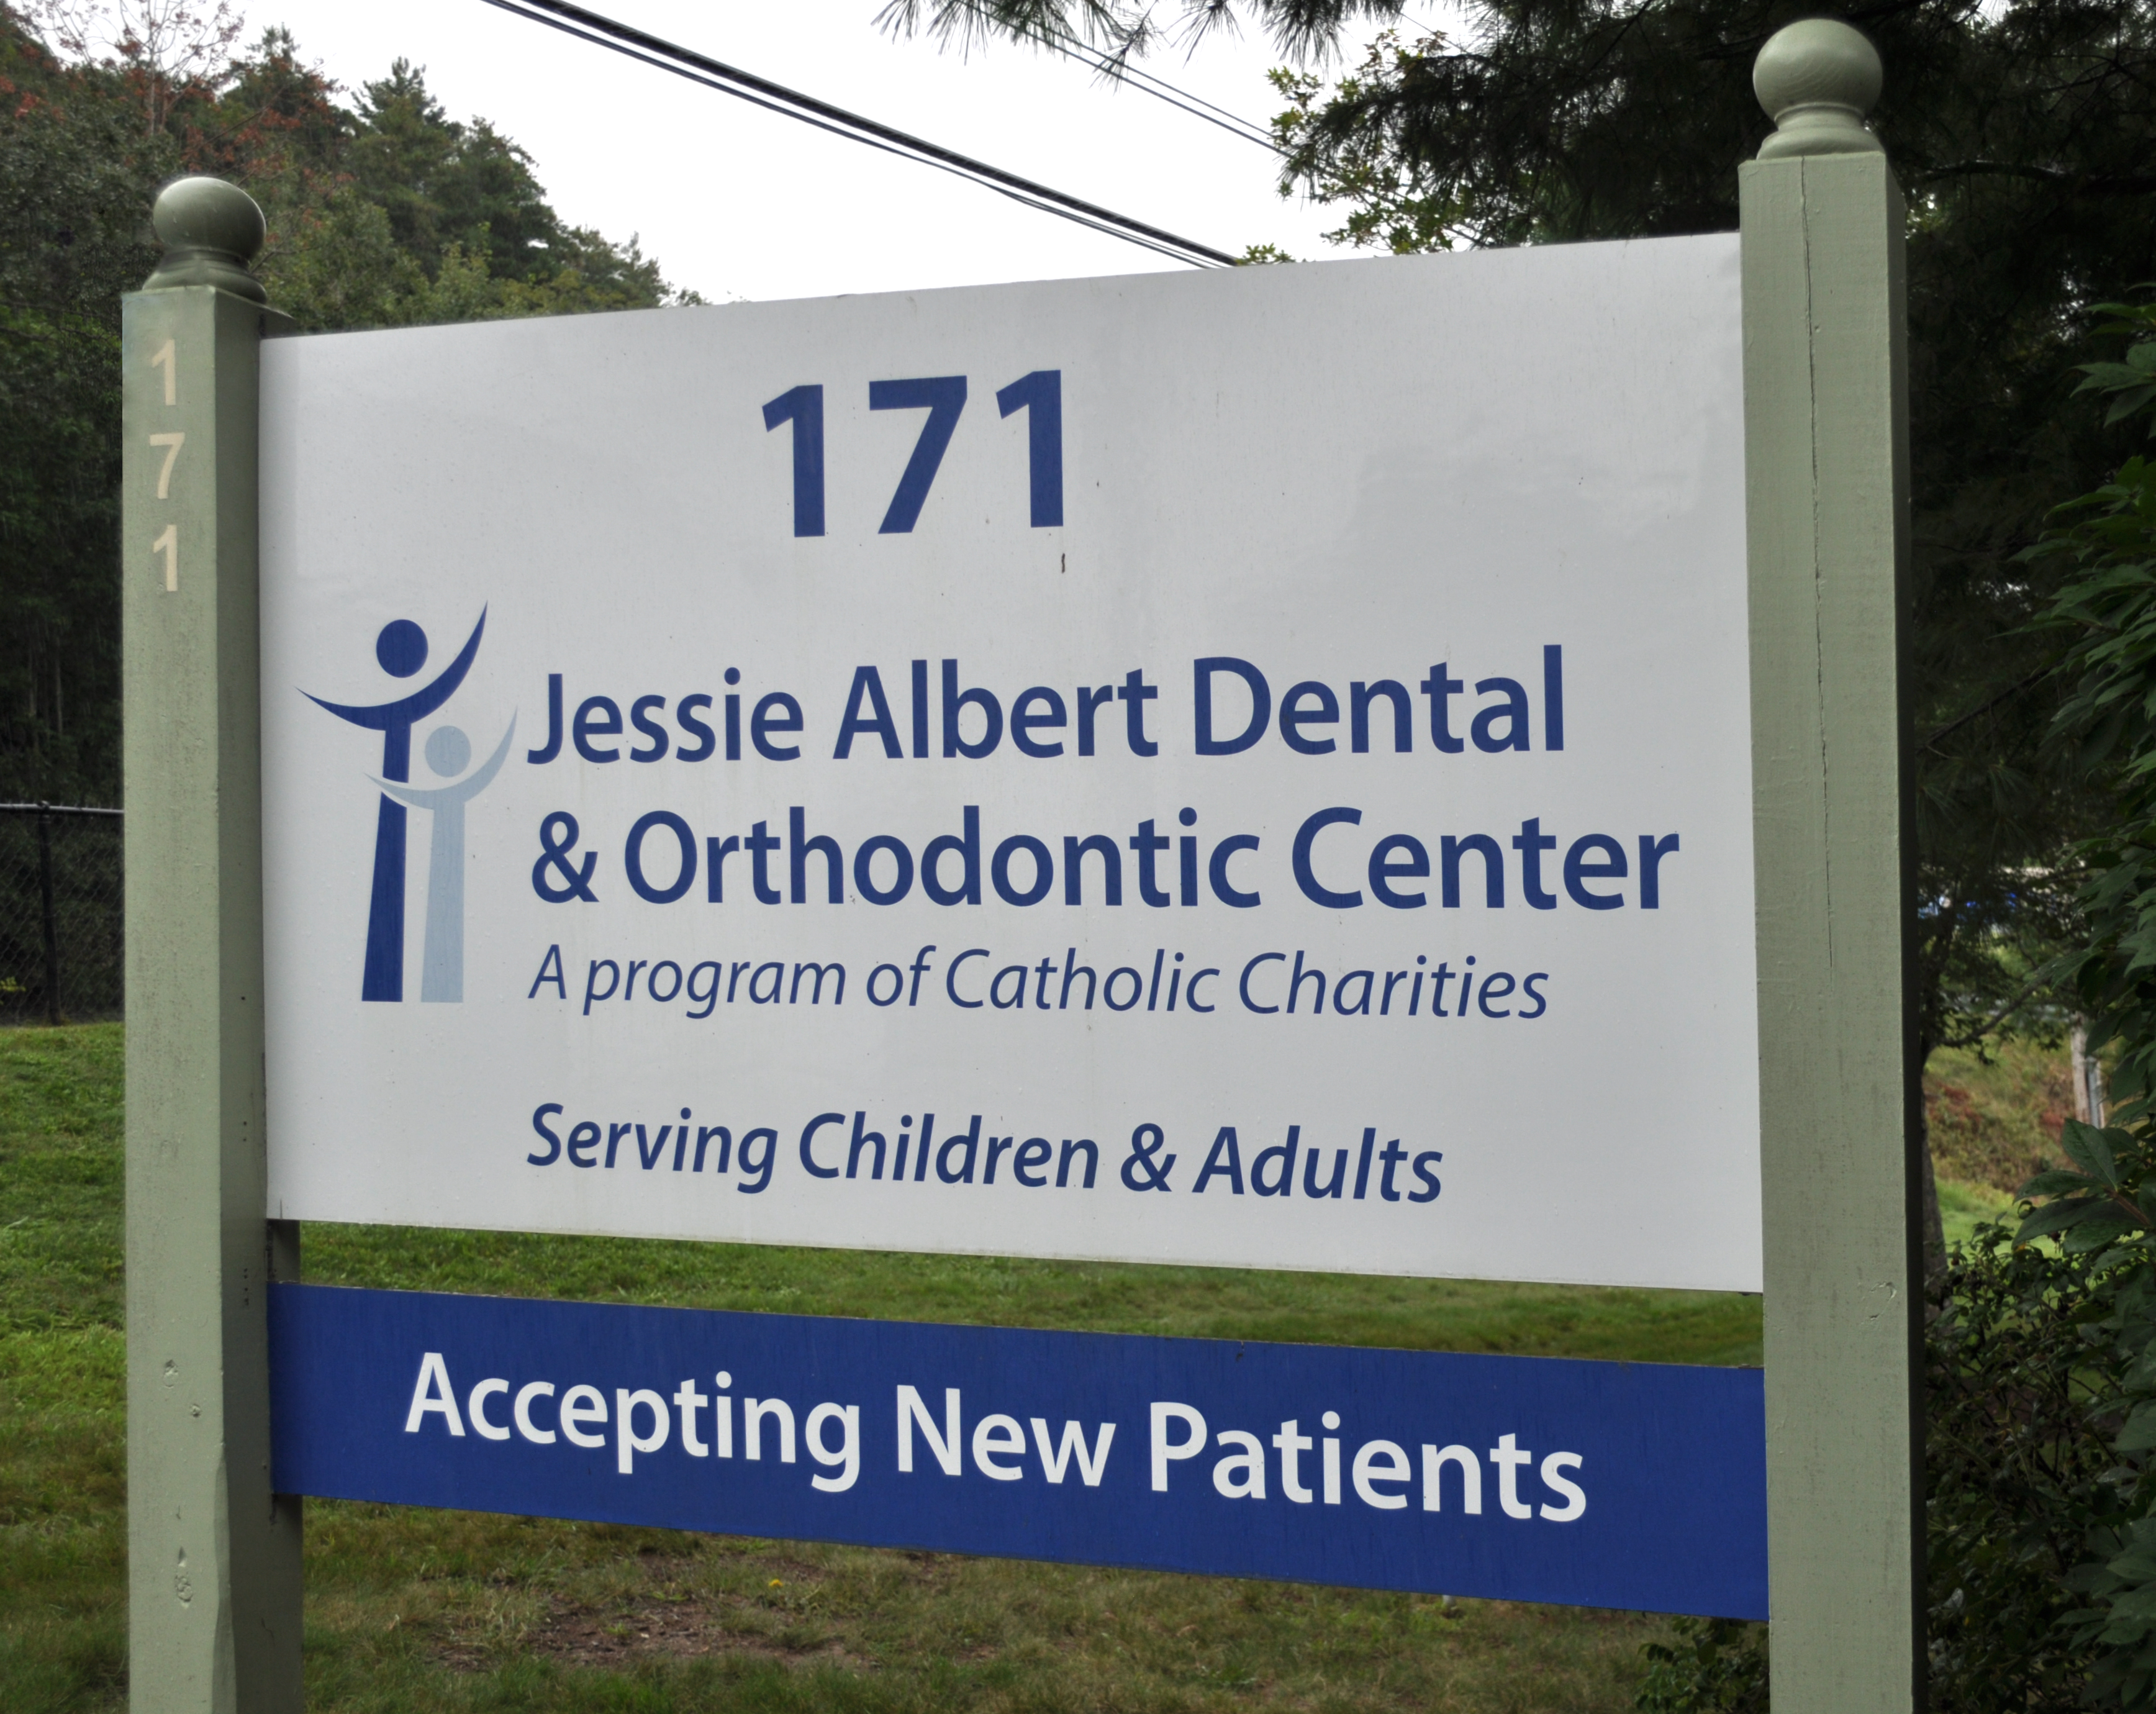 Jessie Albert Dental & Orthodontic Services - Contact & Directions